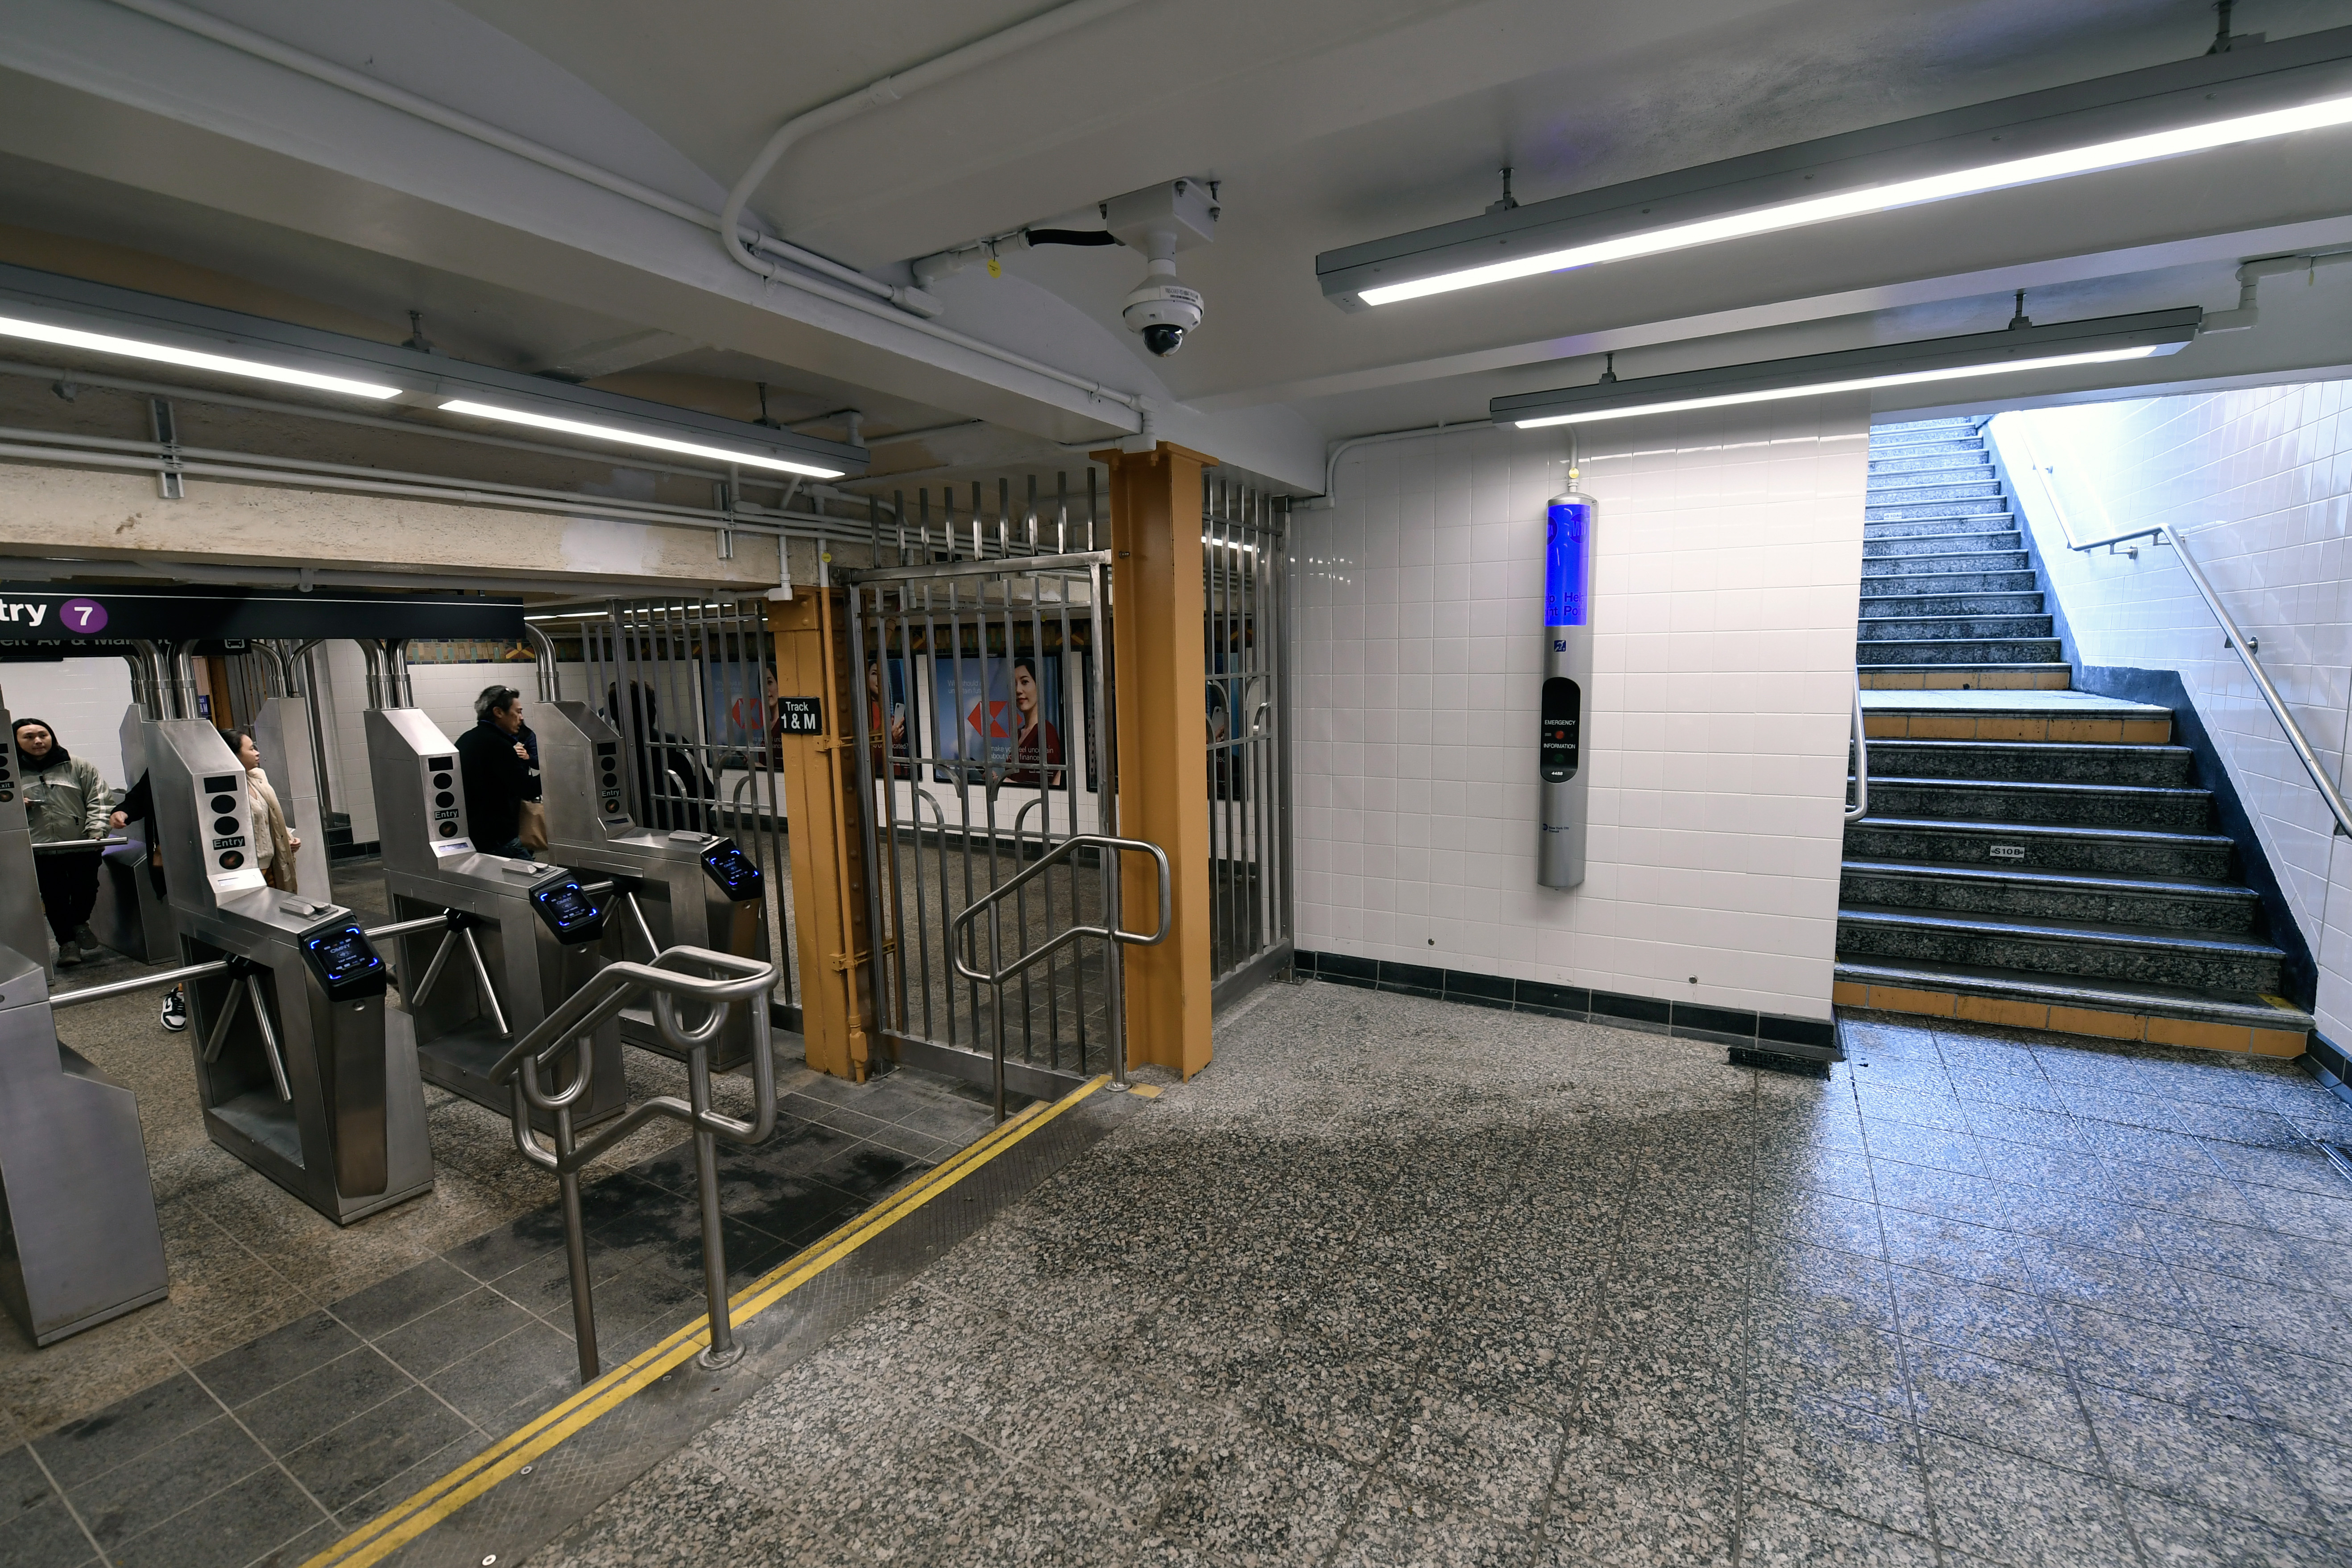 MTA Announces Significant Station Upgrades Completed at Flushing-Main St Subway Station, Customer Circulation Improvements Add 1,200 Square Feet of Space  